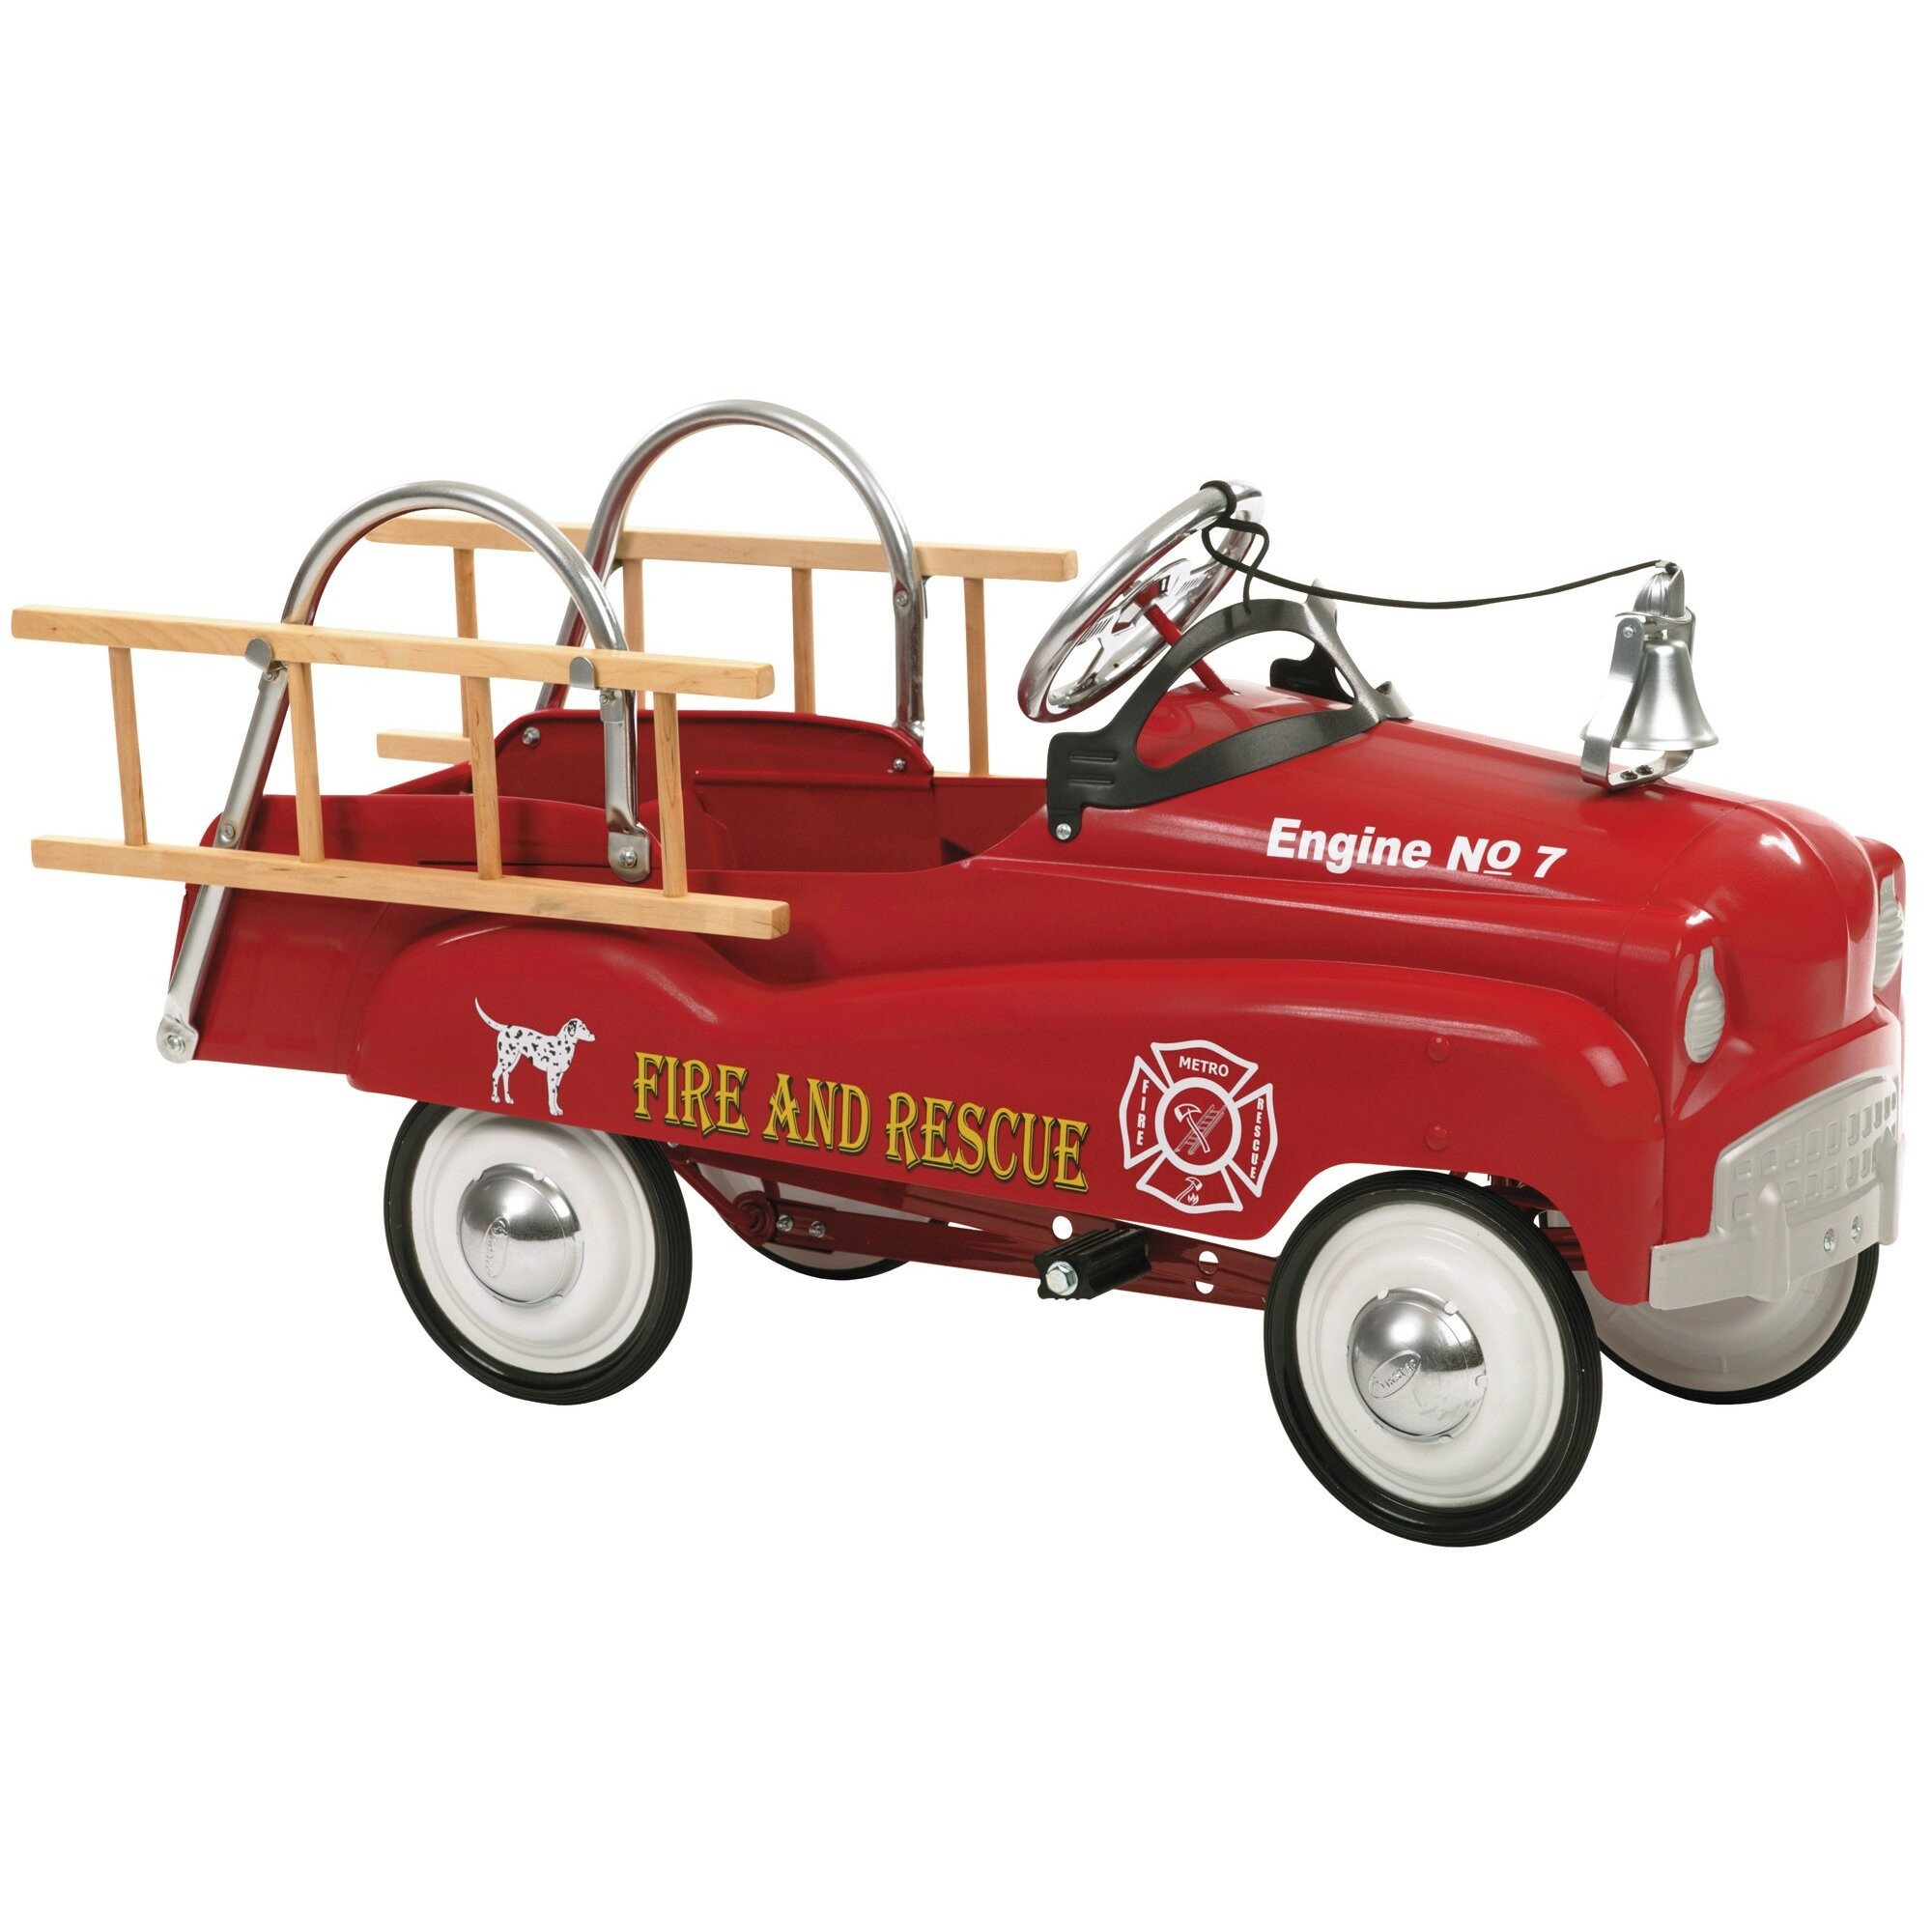 Fire engine ride on toy